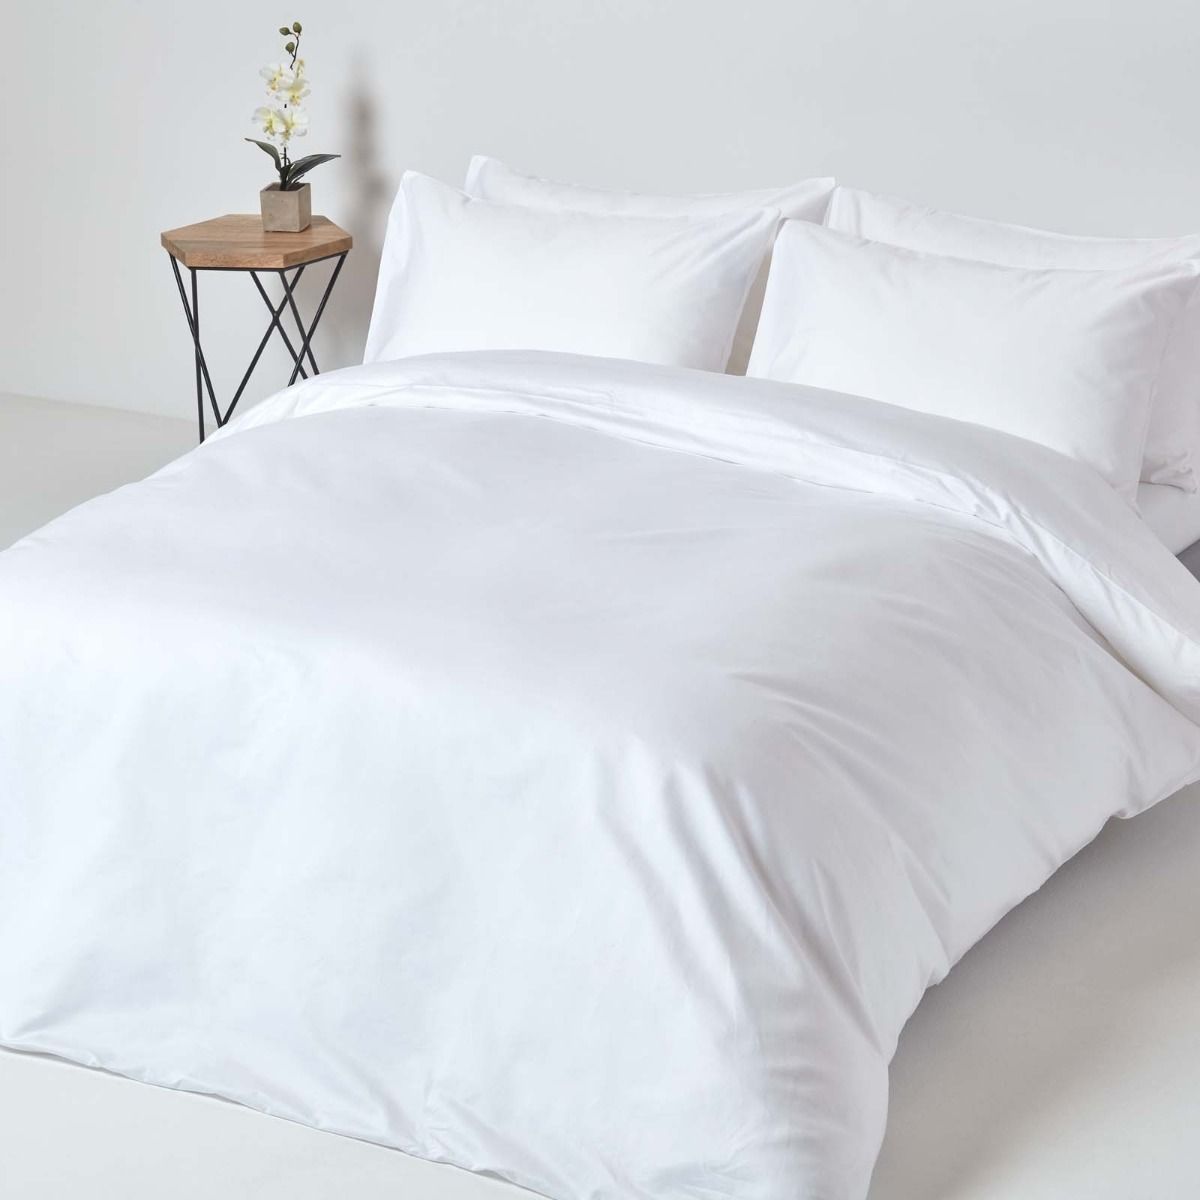 White Egyptian Cotton Duvet Cover With, What Is Good Thread Count For Duvet Cover